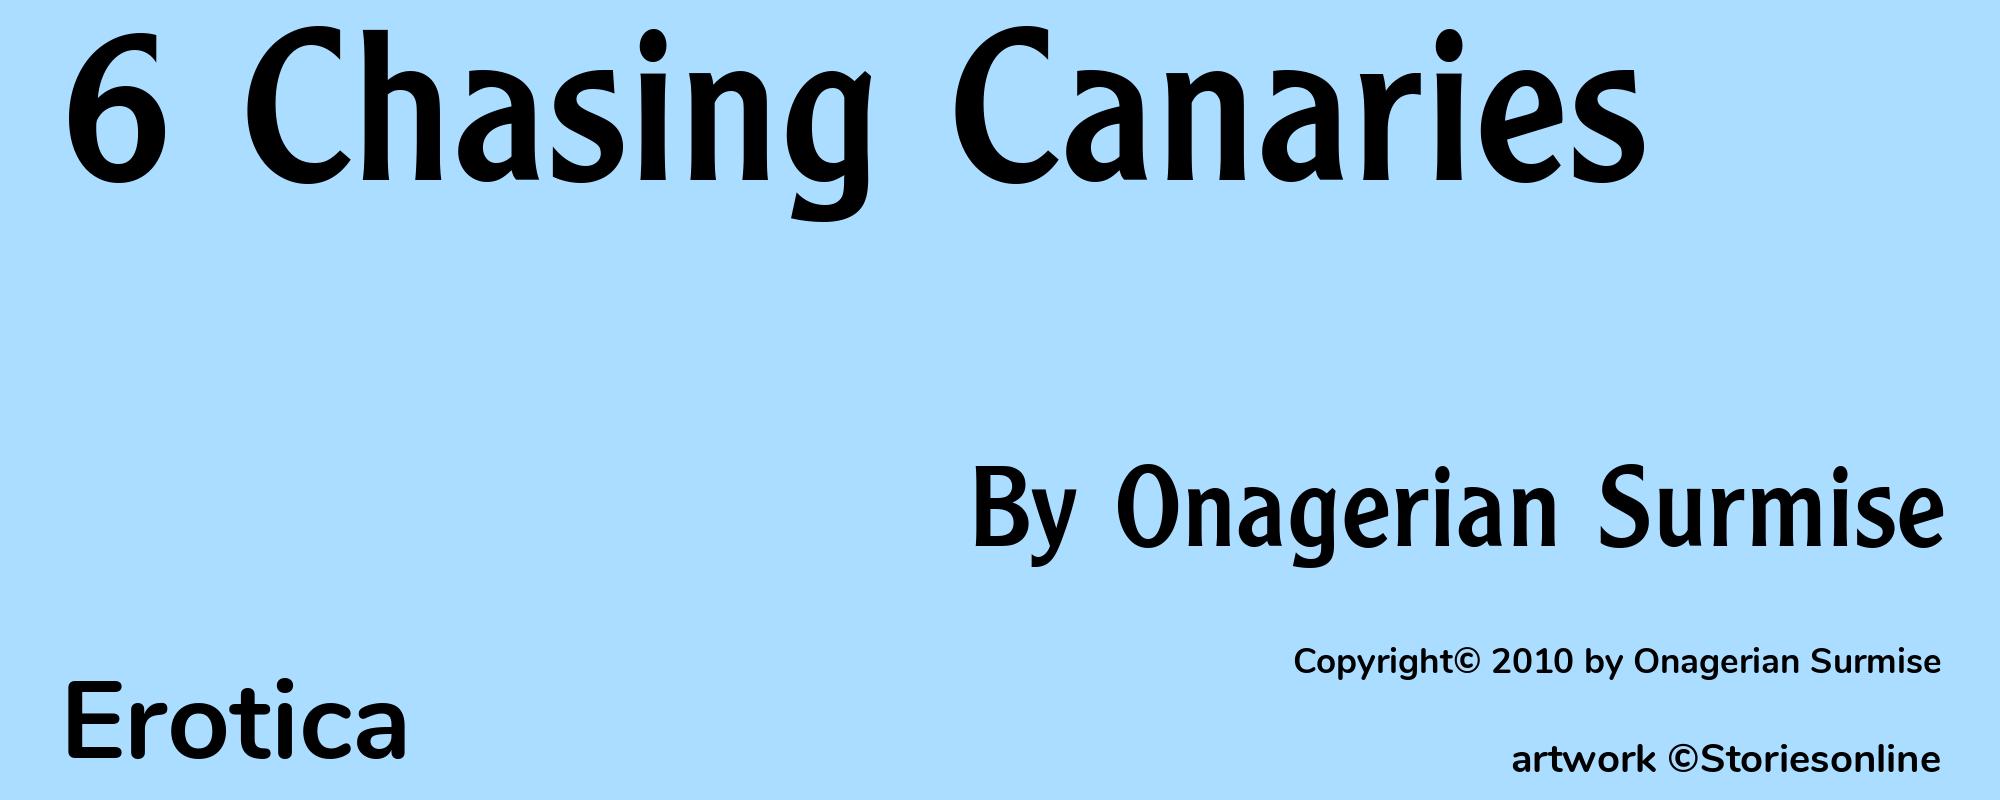 6 Chasing Canaries - Cover